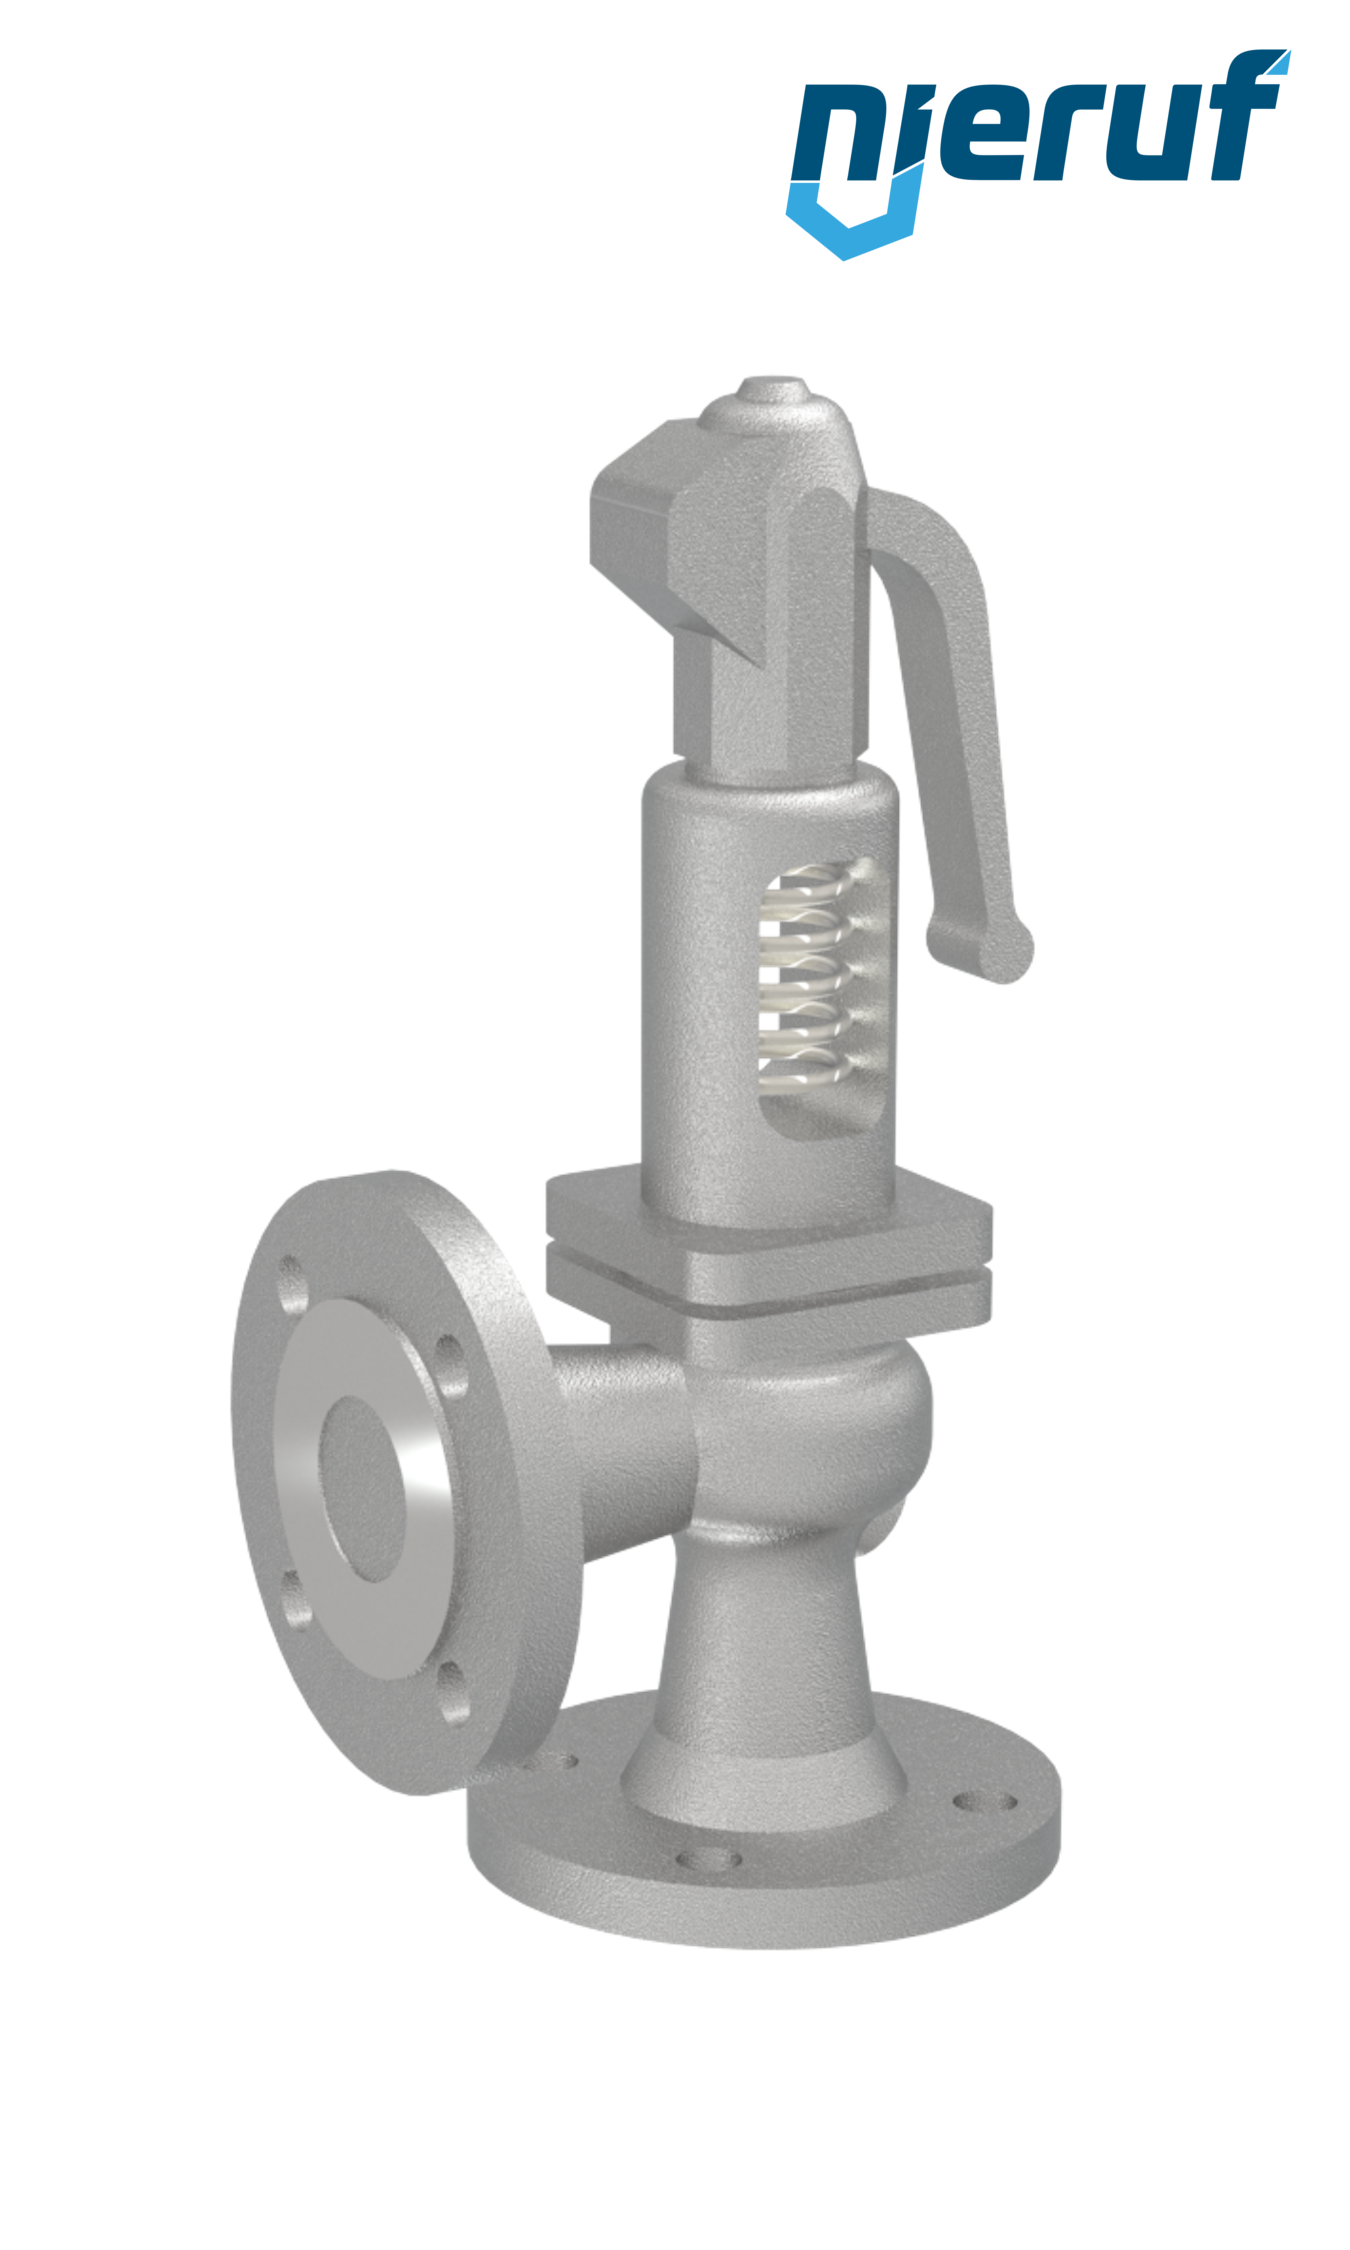 flange-safety valve DN25/DN25 SF0202, cast steel metal, with lever